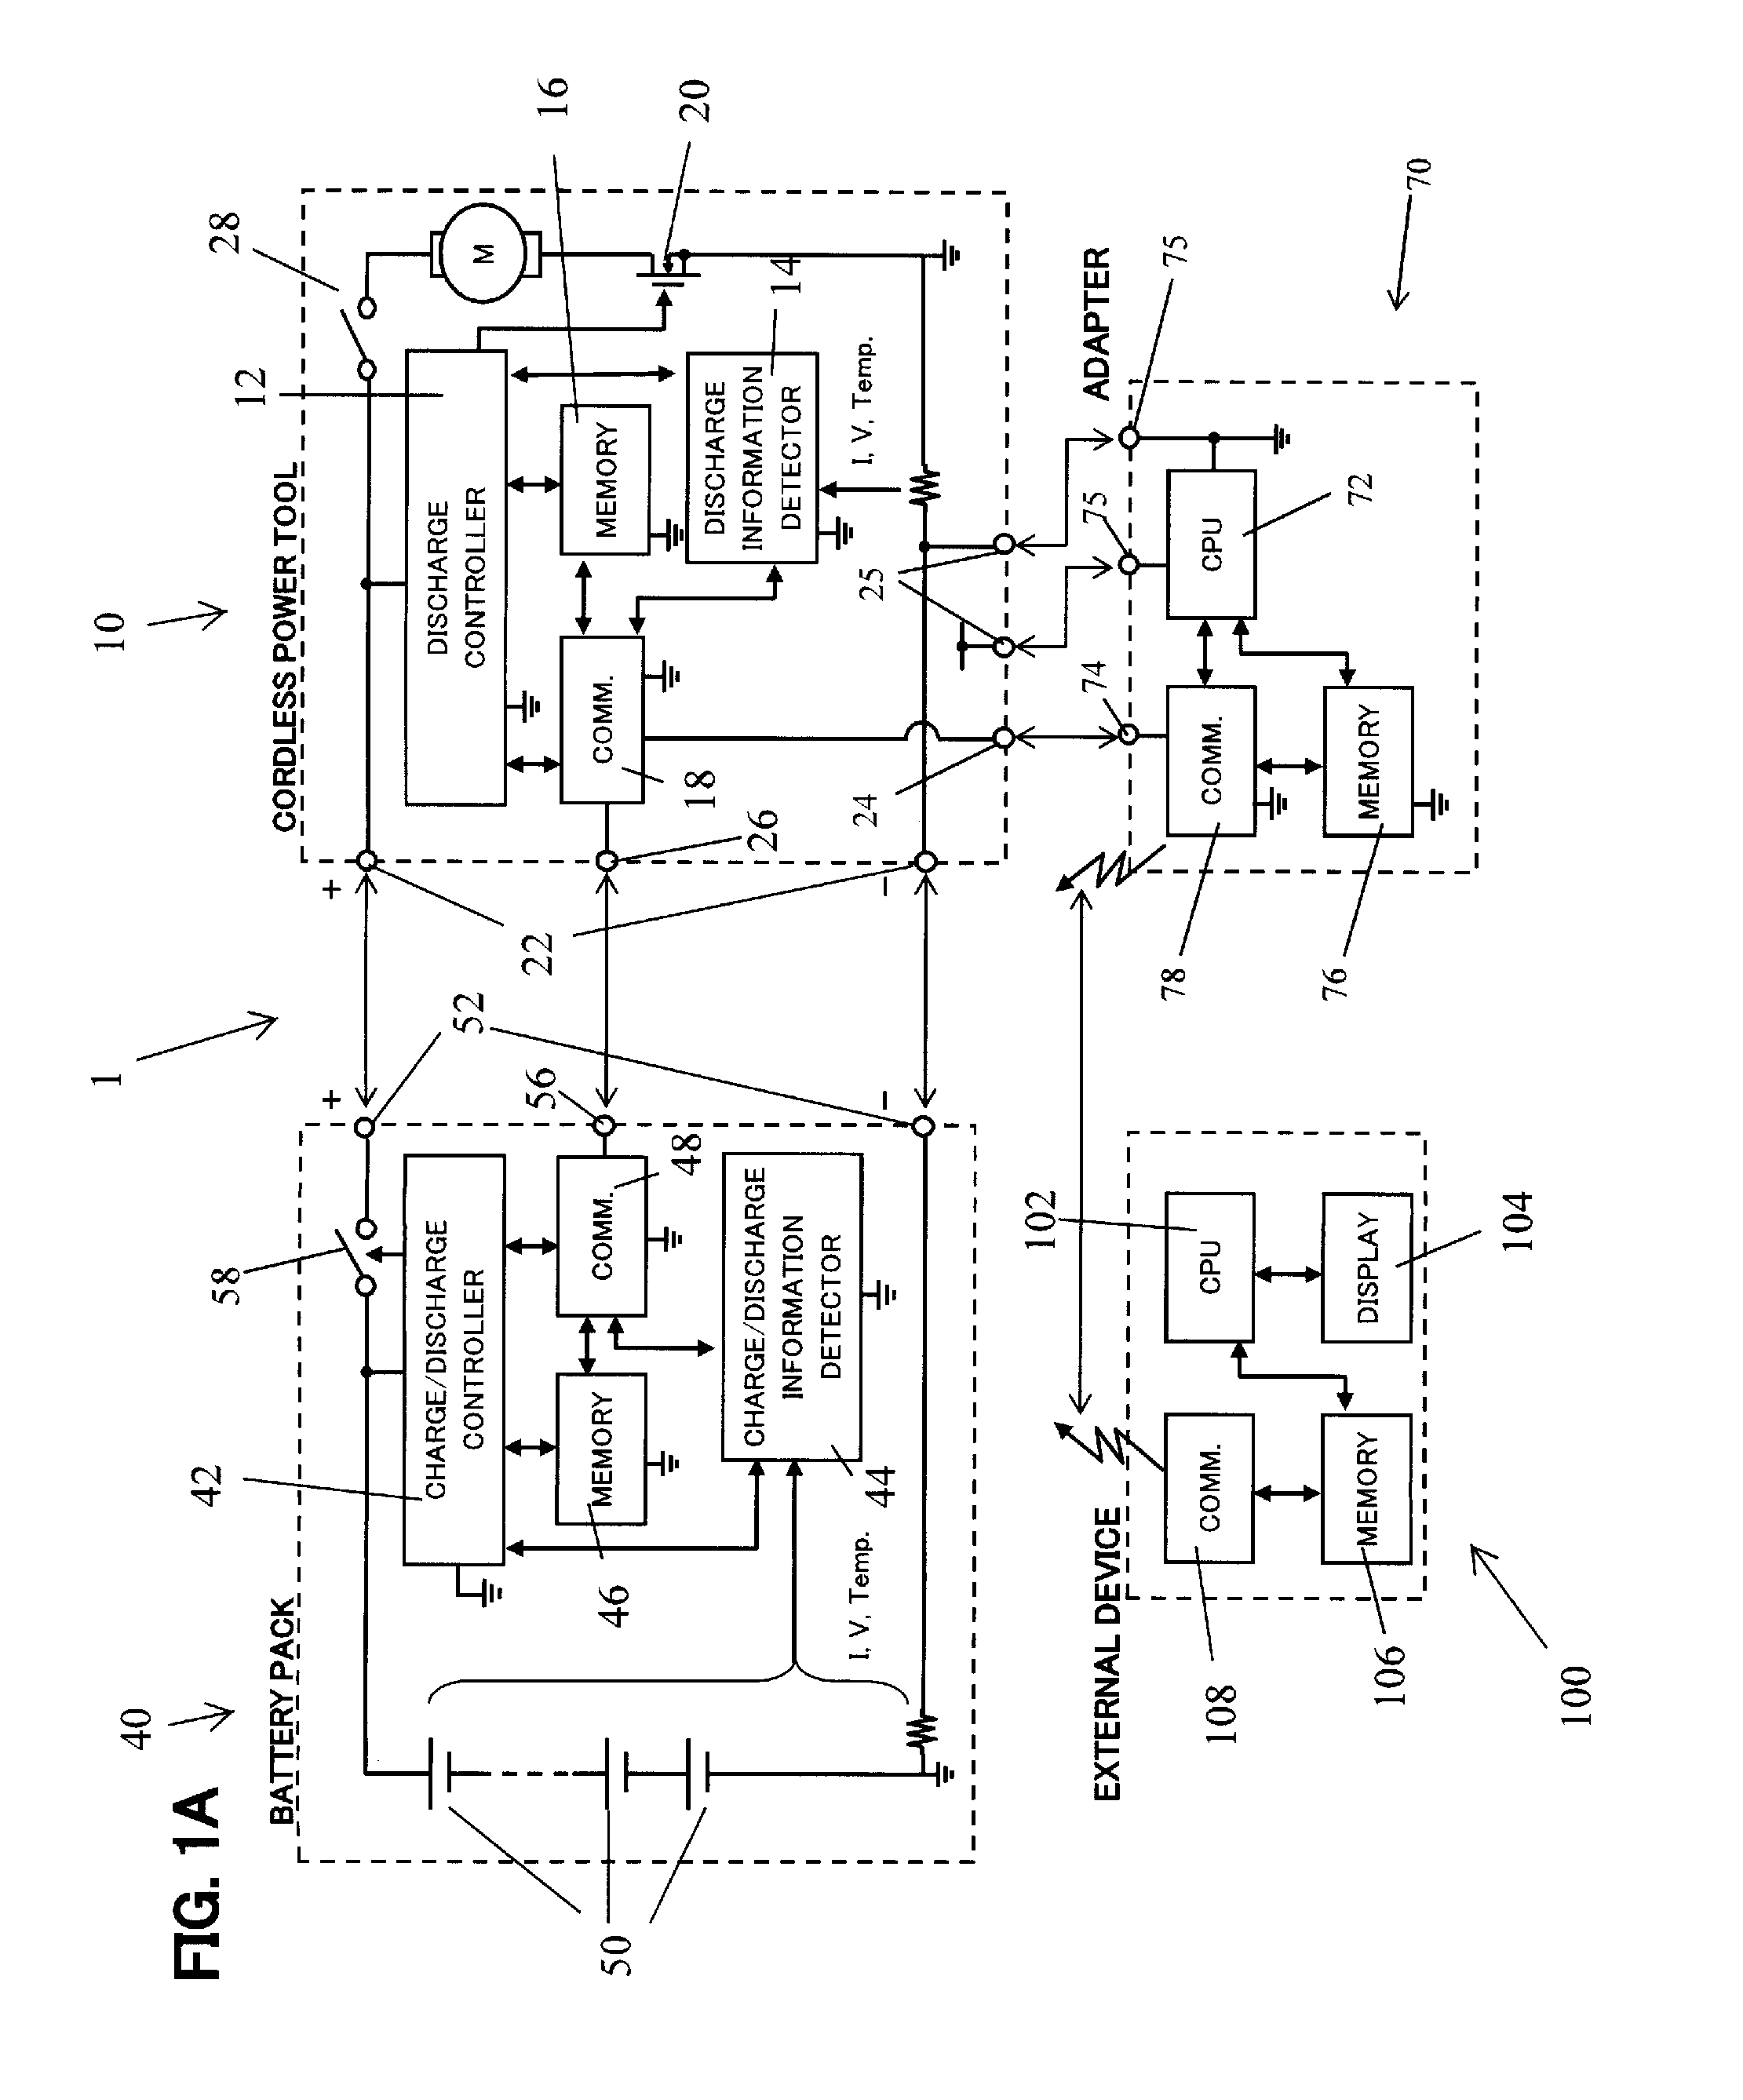 Portable battery pack charging system, method for recharging a battery pack, and adapter therefor